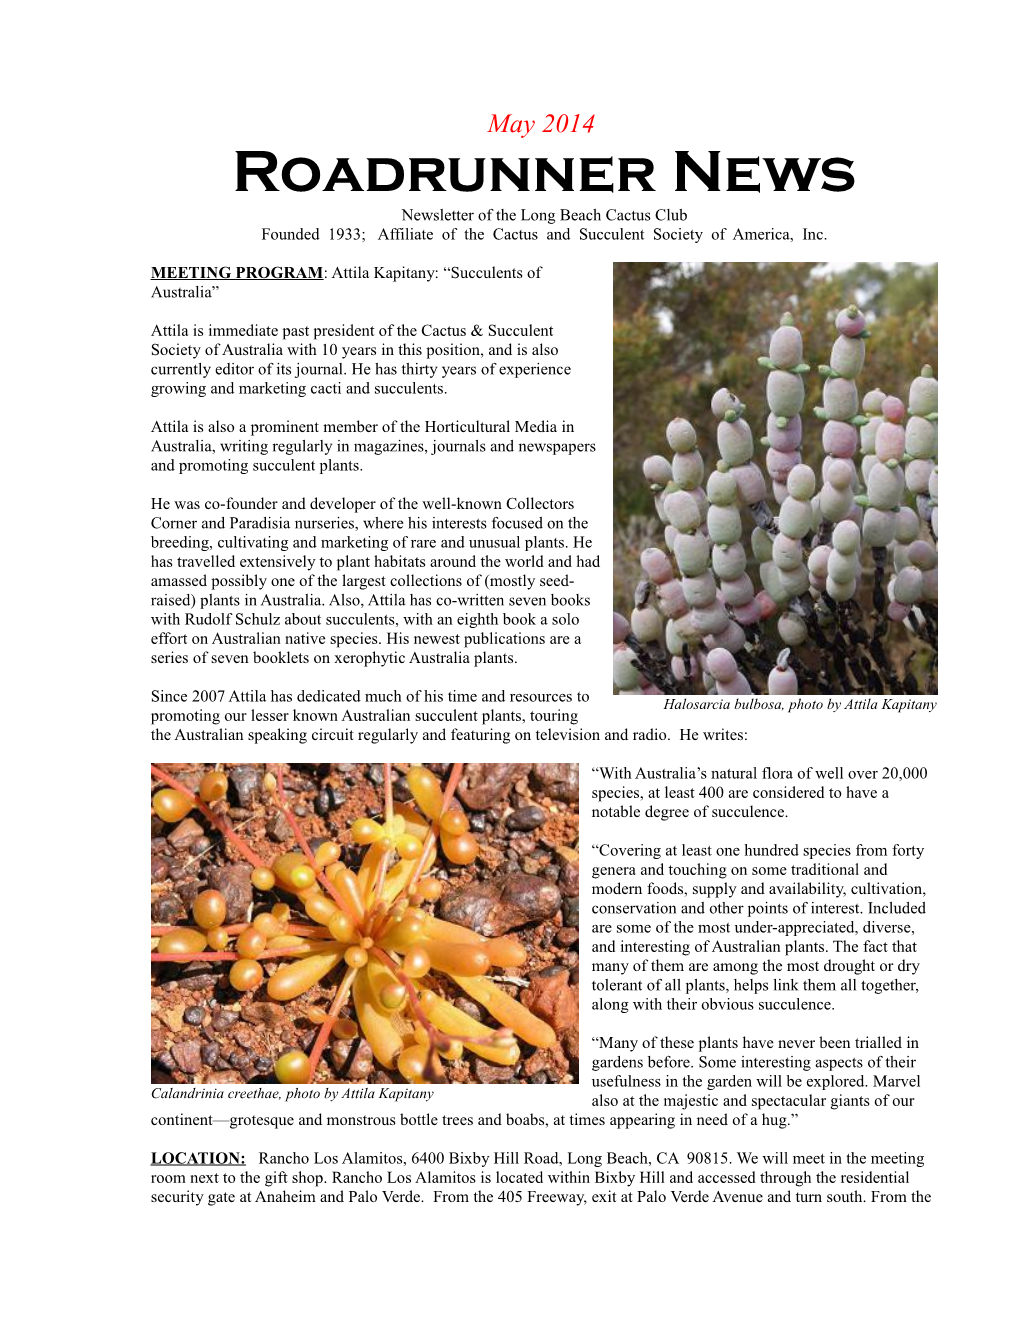 Roadrunner News Newsletter of the Long Beach Cactus Club Founded 1933; Affiliate of the Cactus and Succulent Society of America, Inc